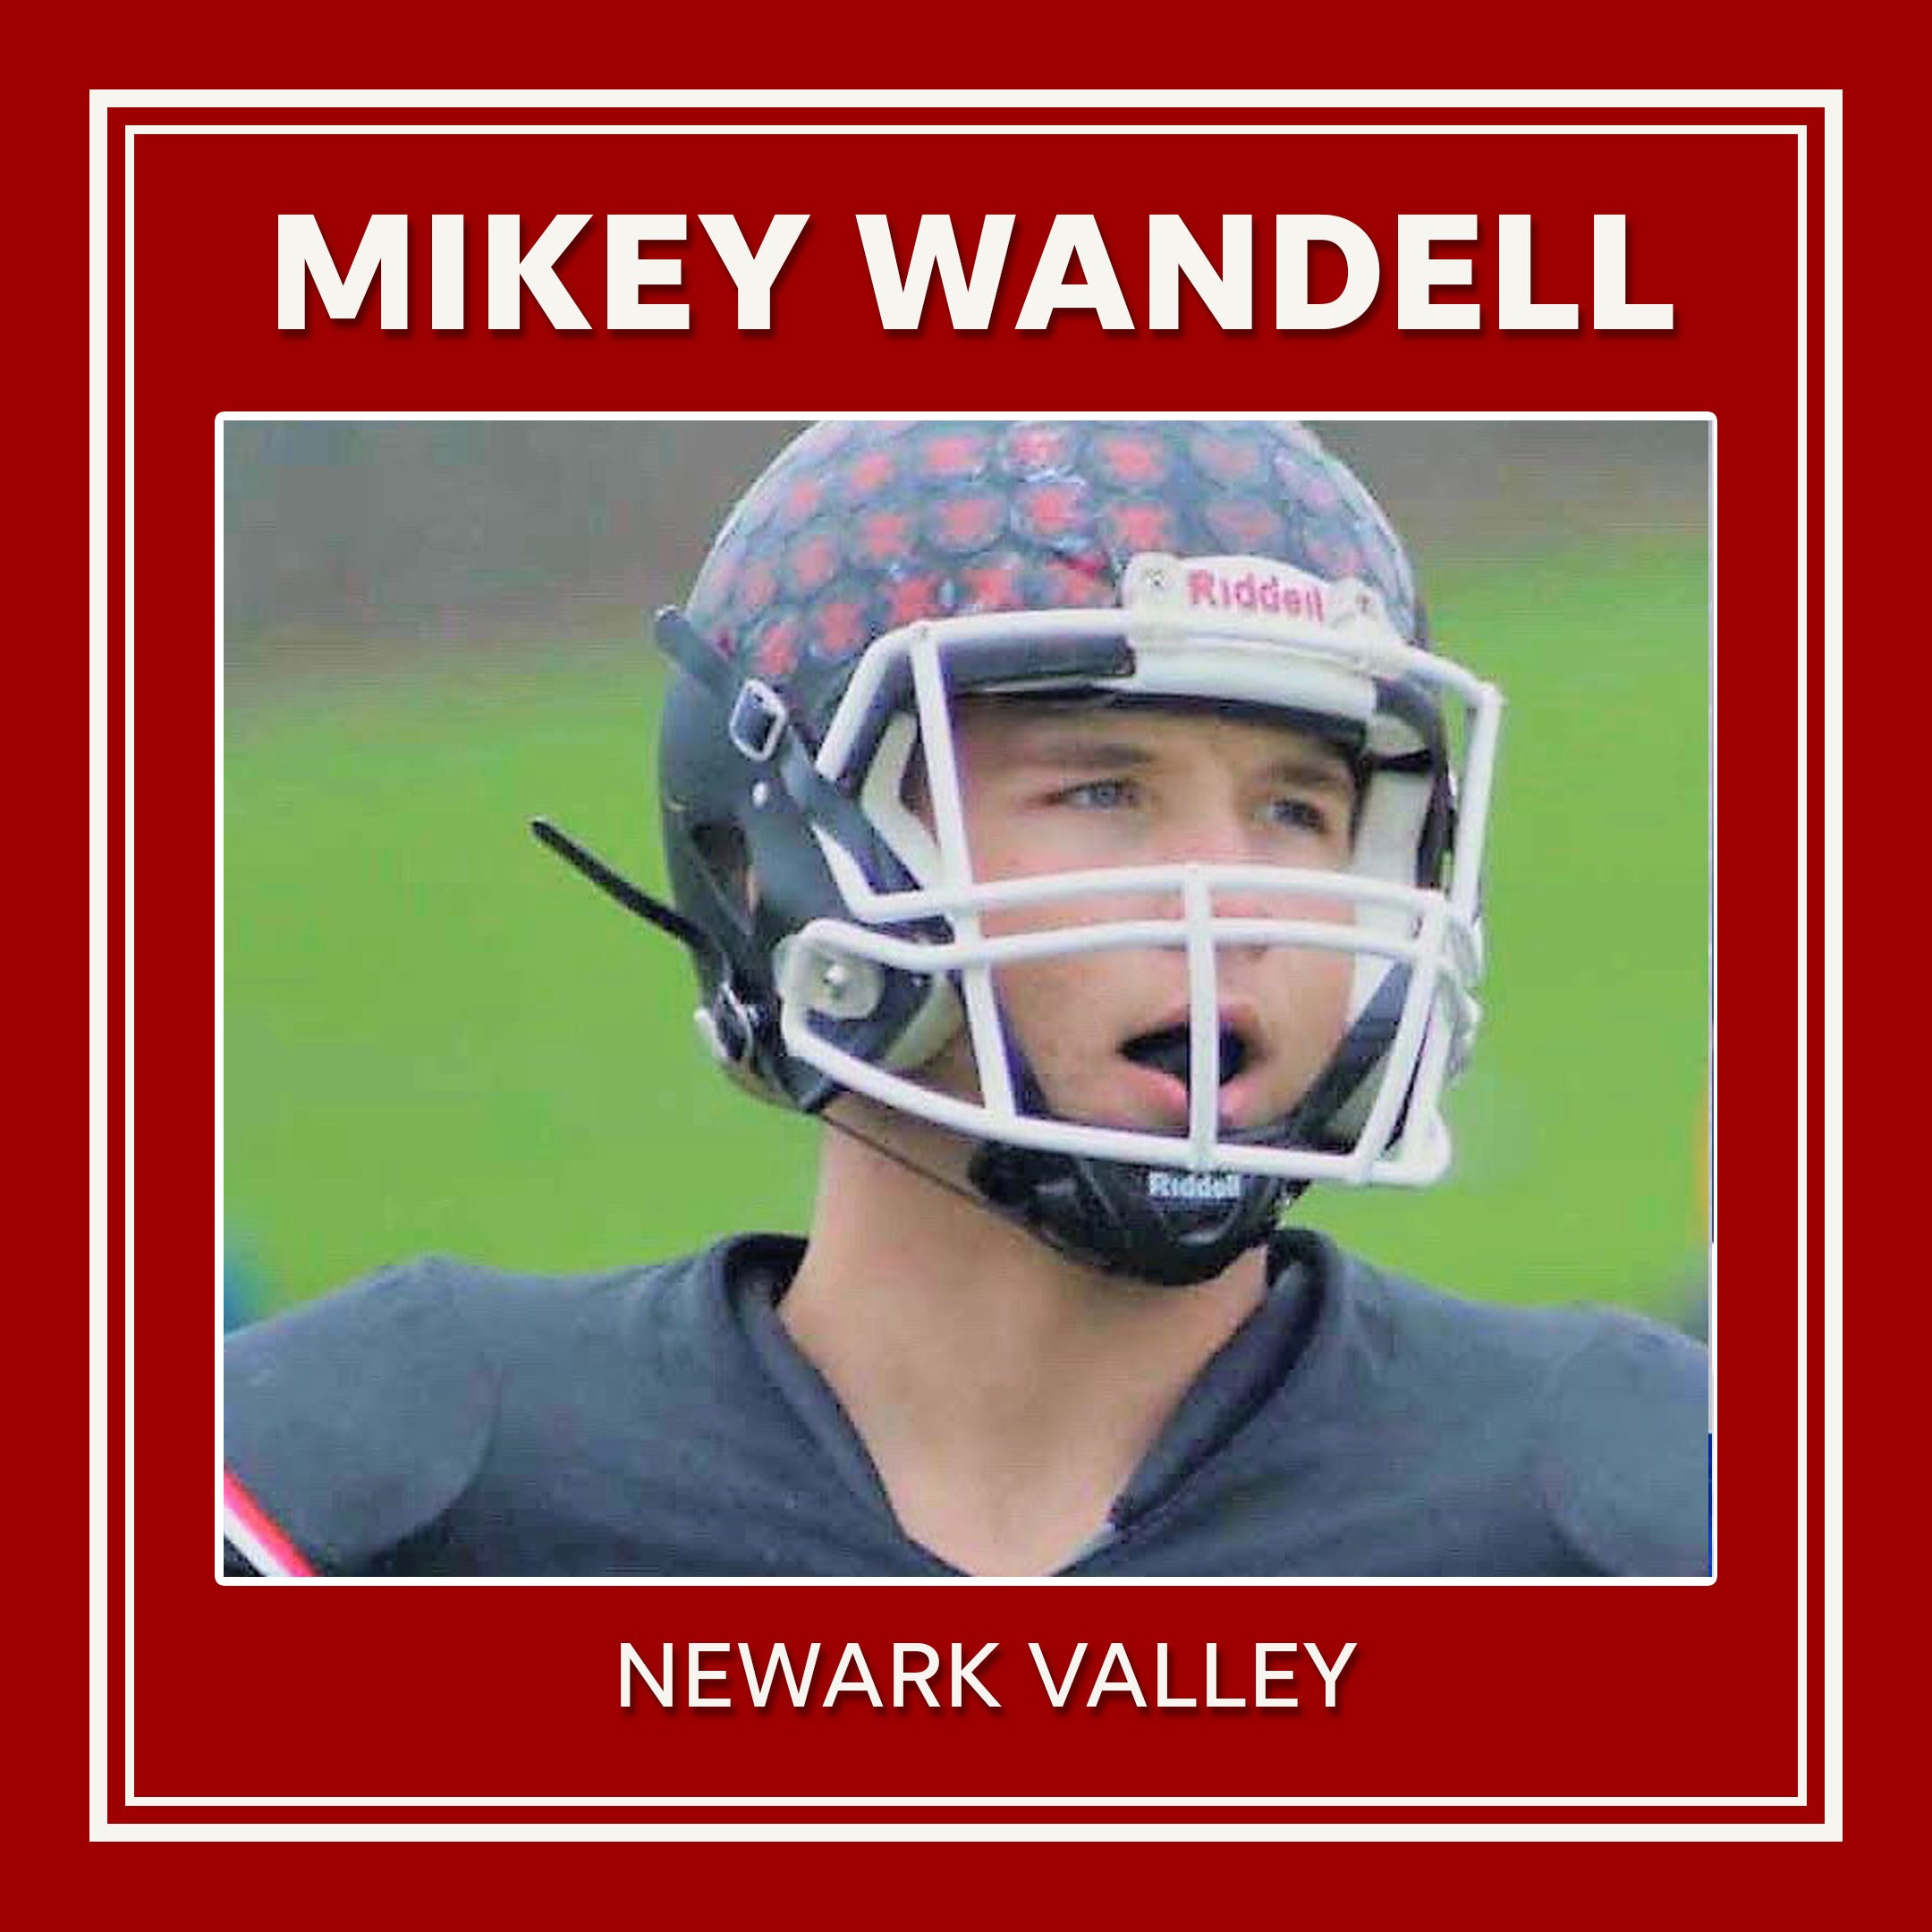 Mikey Wandell